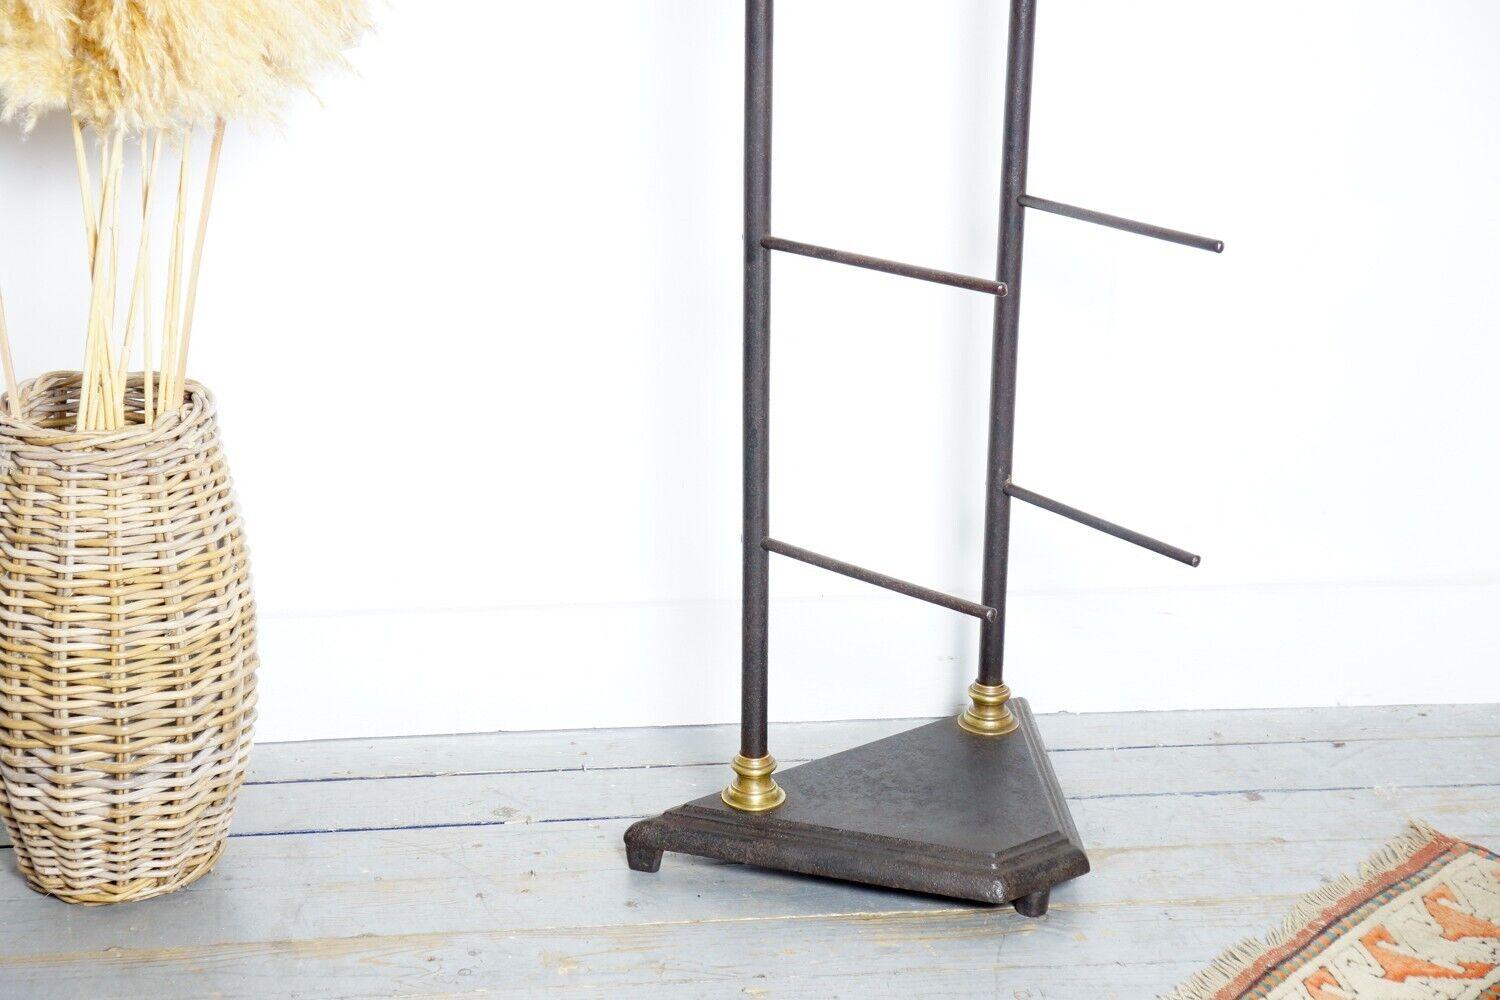 Antique Retail Display Stand

Antique shop Display Stand/Unit on a heavy base

Original late 19th century retail display stand possibly from a bakers. Made from cast iron with ornate cast finials at either end. Both poles sit within a heavy